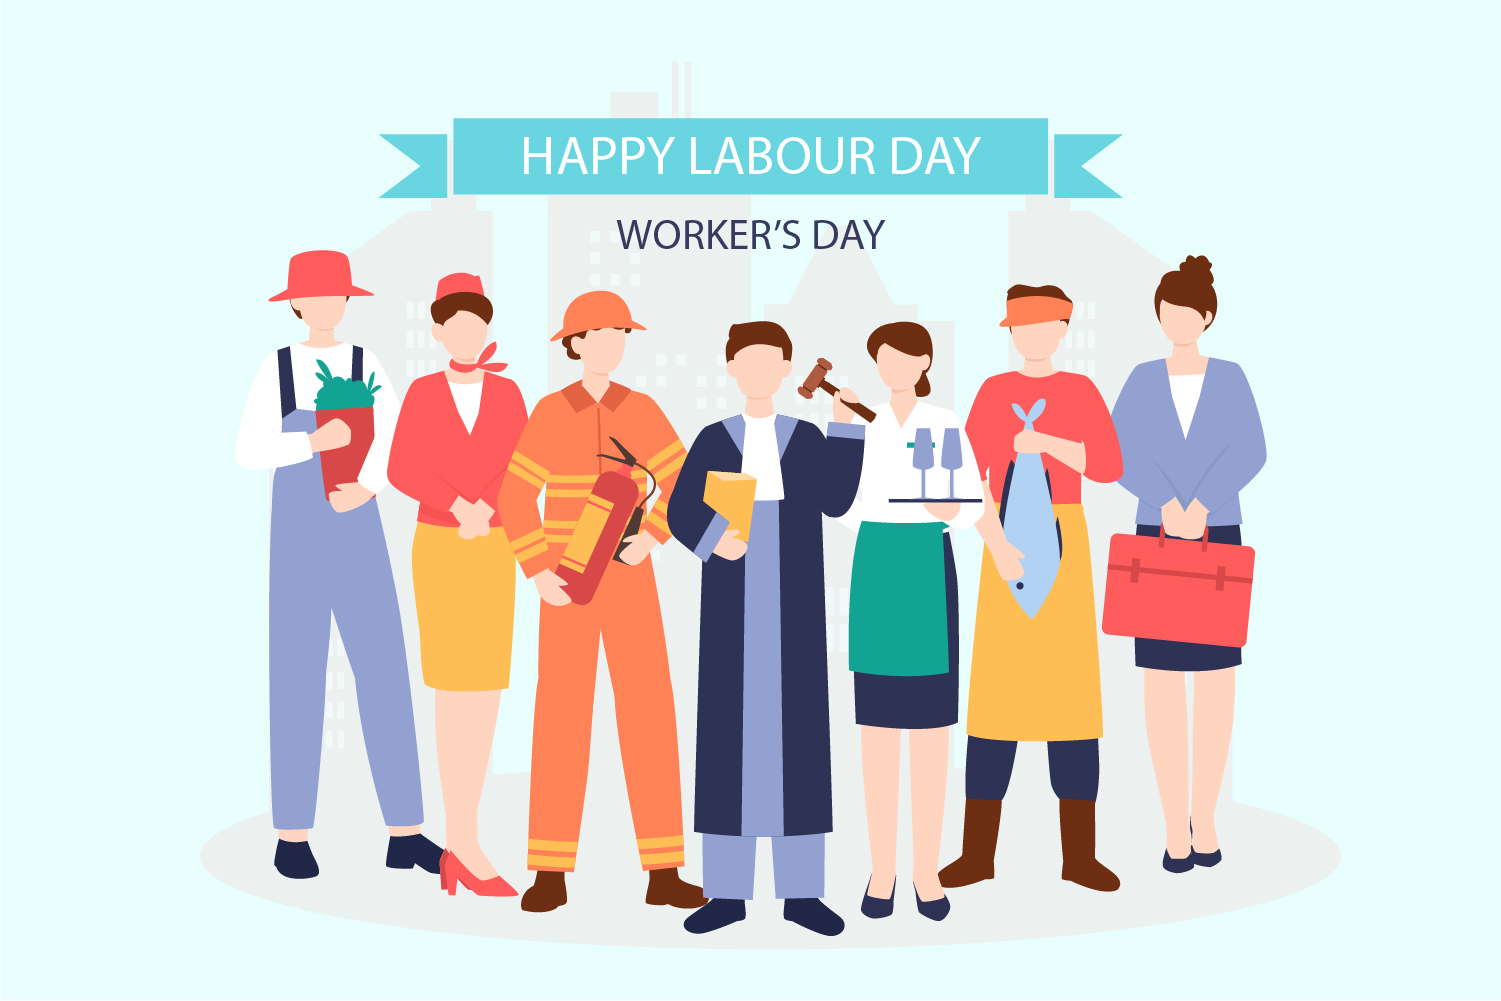 Labor Day Clipart: 10 Free Vector Graphics and Illustrations to Download